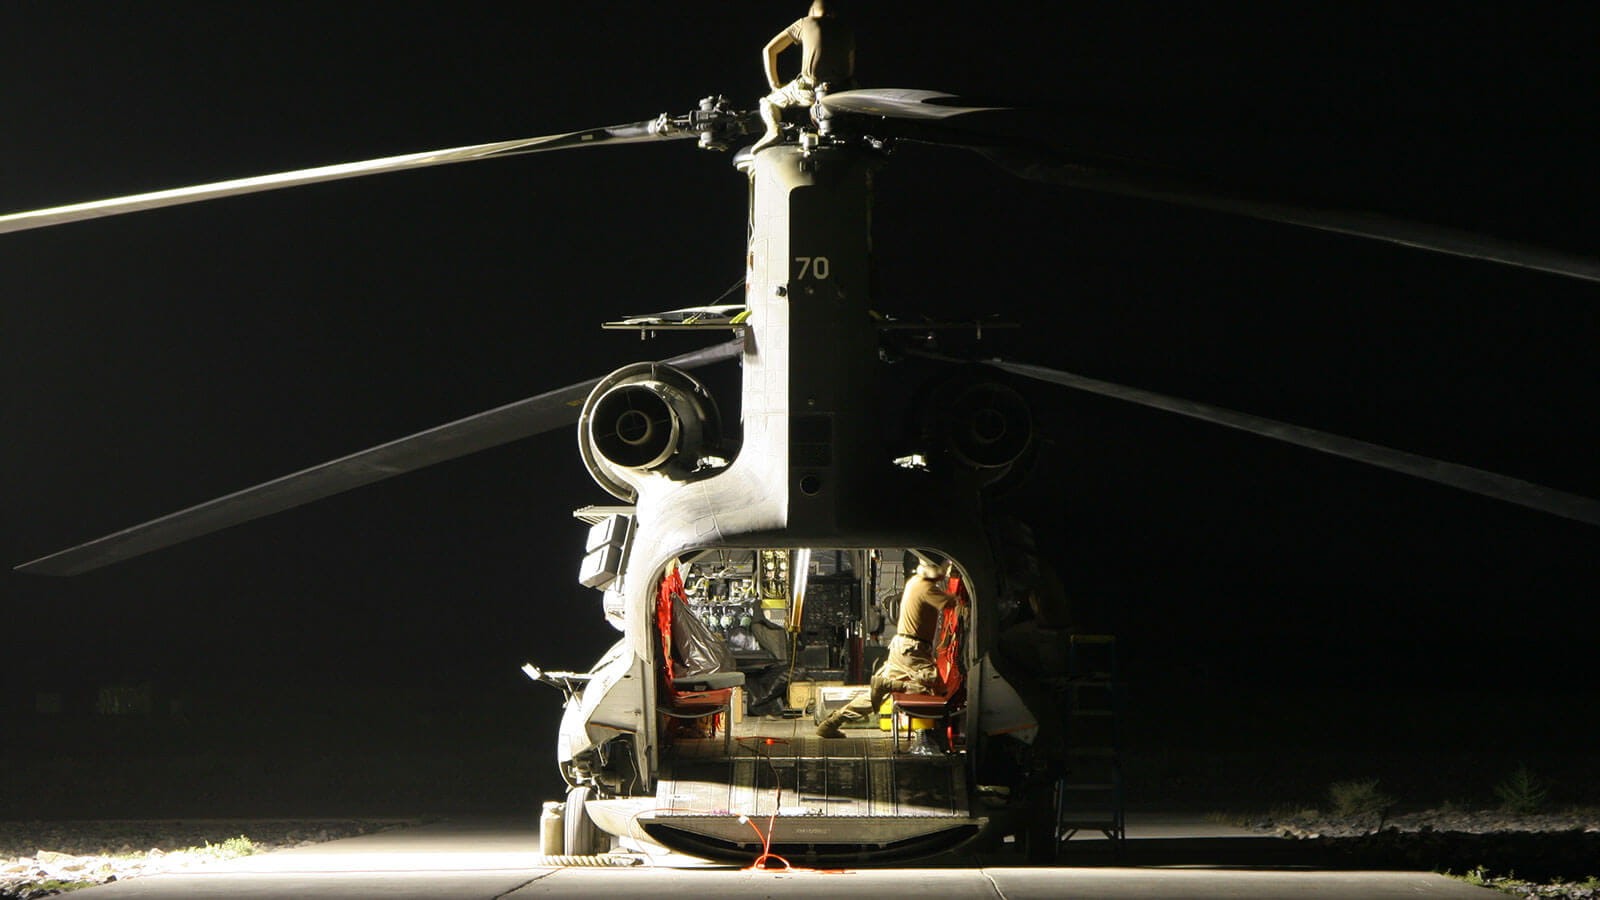 Helicopter sitting on the ground